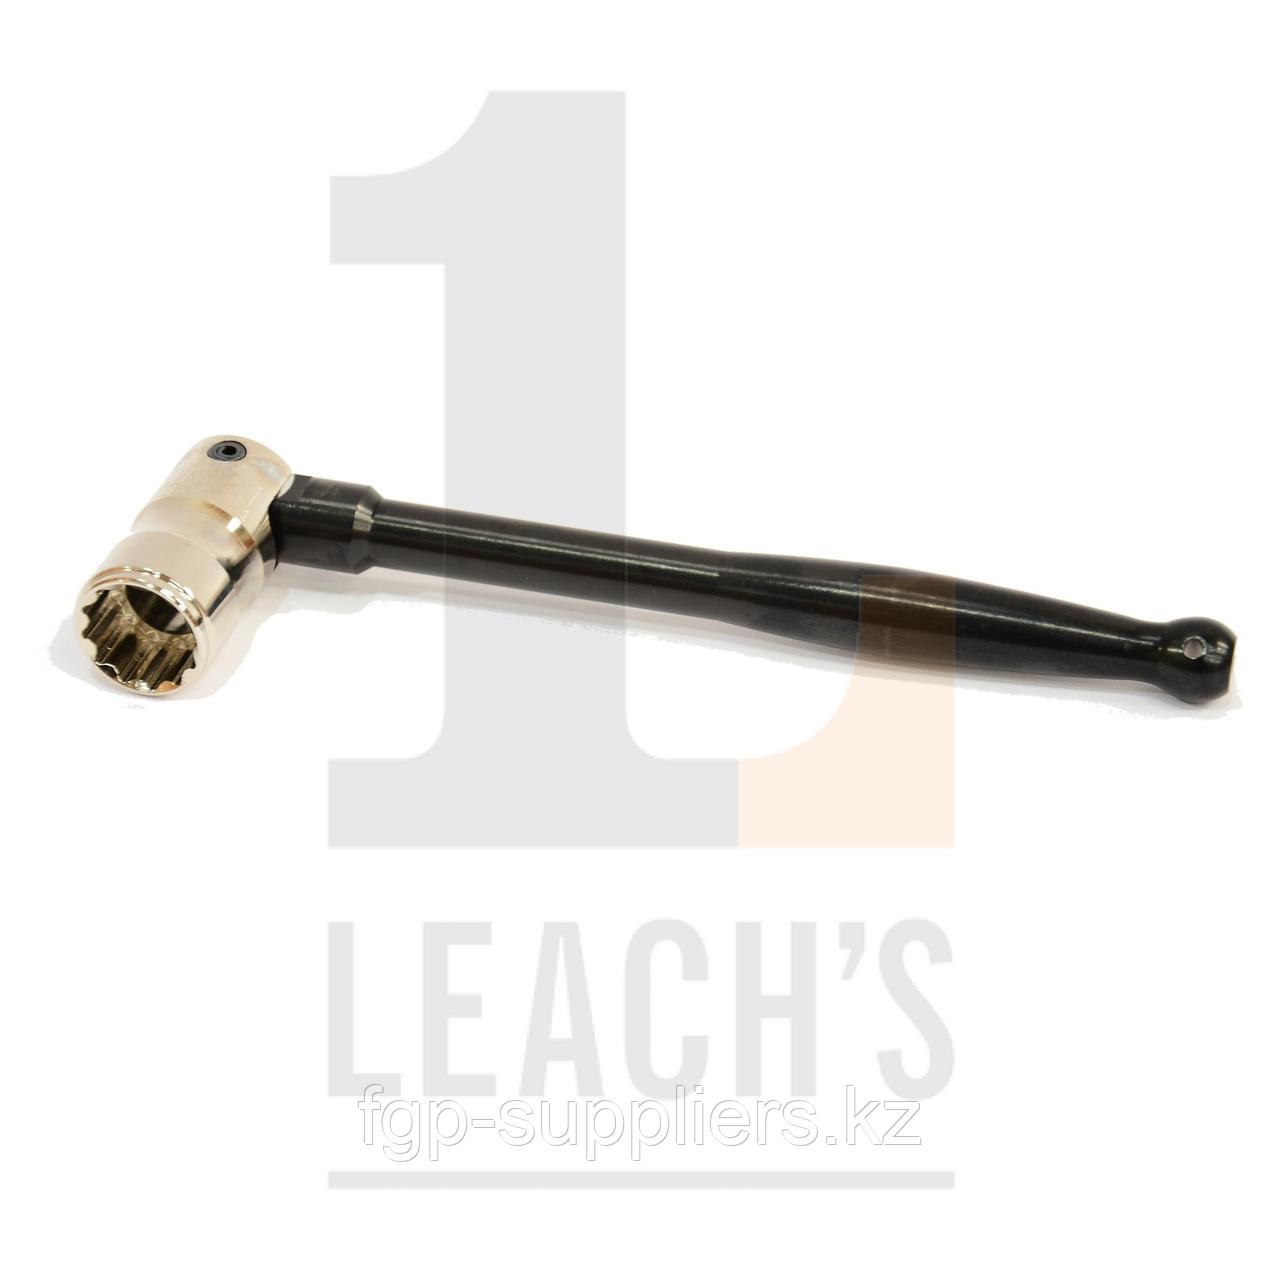 Coloured Whippet Spanner - 7/16" Leach's IMN Bi-Hex Steel Pinched Box with A.Alloy Black Silk Handle / Цветной торцовый гаечный ключ 7/16 Leach's - фото 1 - id-p65537655